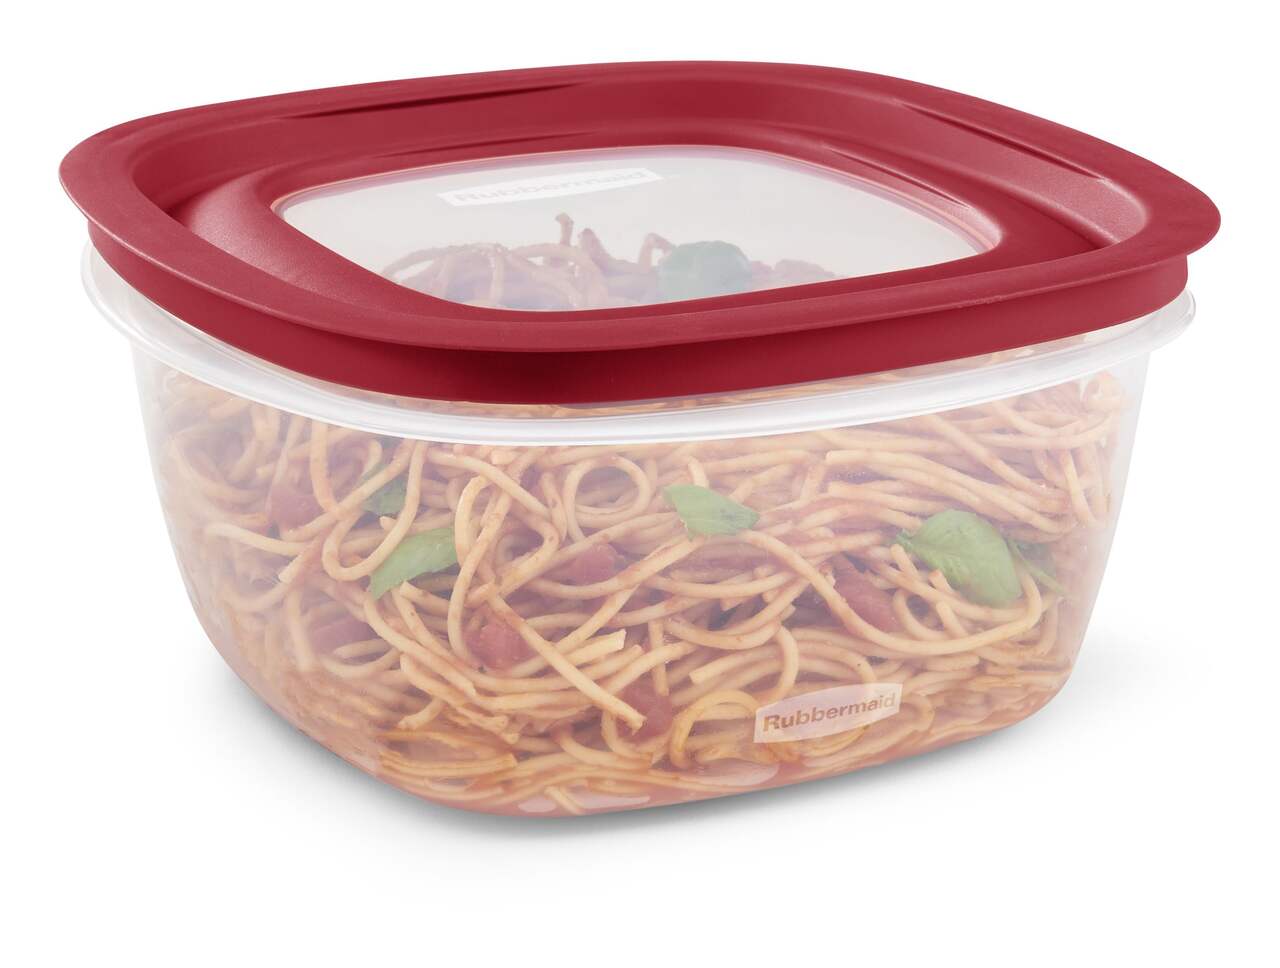 https://media-www.canadiantire.ca/product/living/kitchen/food-storage/1429332/rubbermaid-pressnlock-14-cup-50728be9-91dd-41df-8efc-3580e8c8ac12-jpgrendition.jpg?imdensity=1&imwidth=1244&impolicy=mZoom